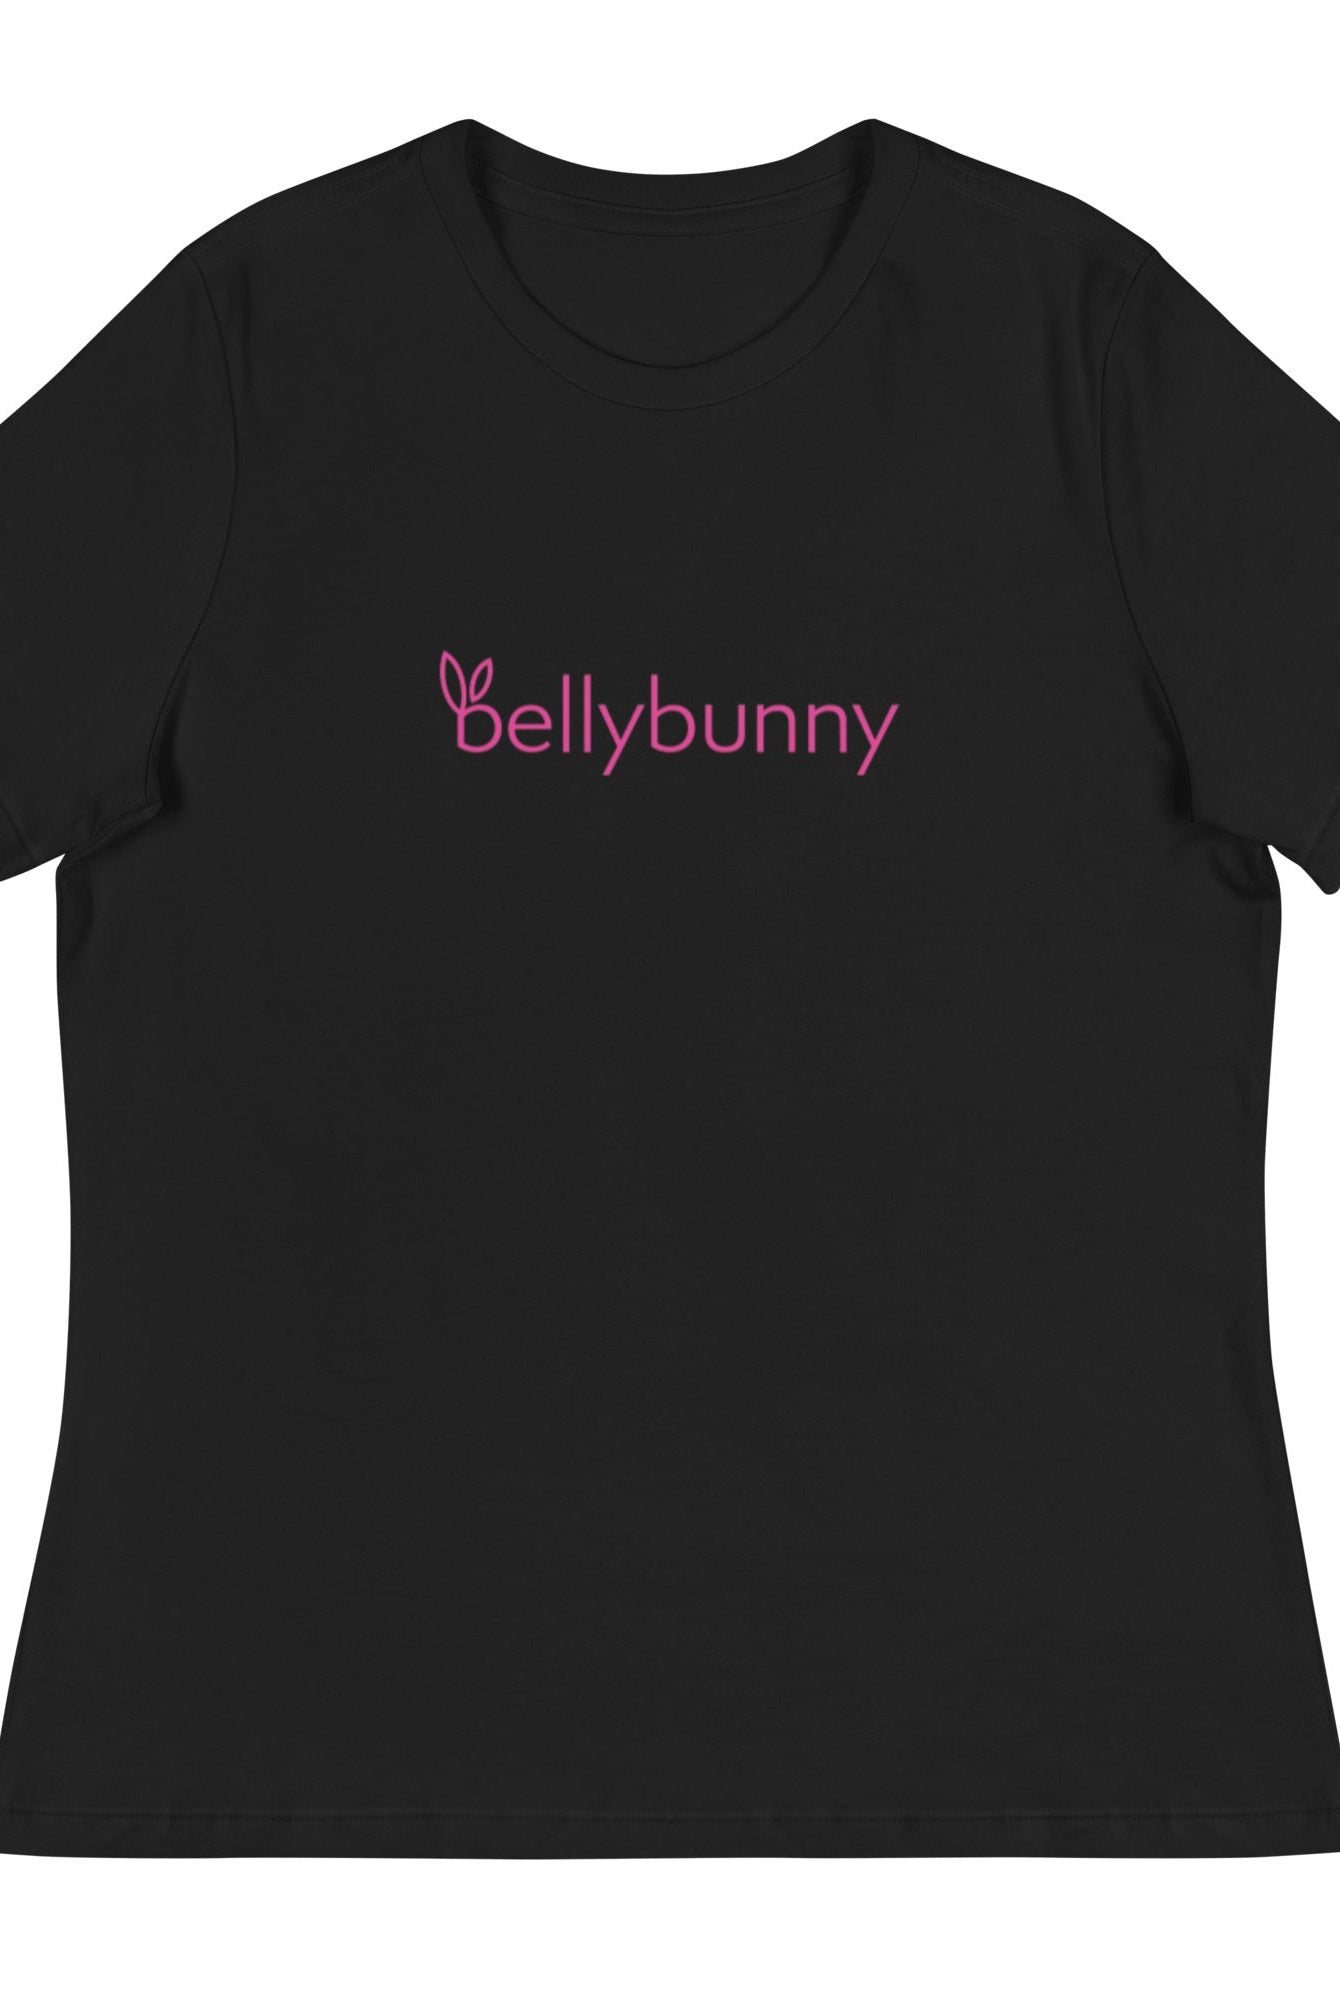 Bellybunny-Women's Relaxed Fit T-Shirt-black with pink logo